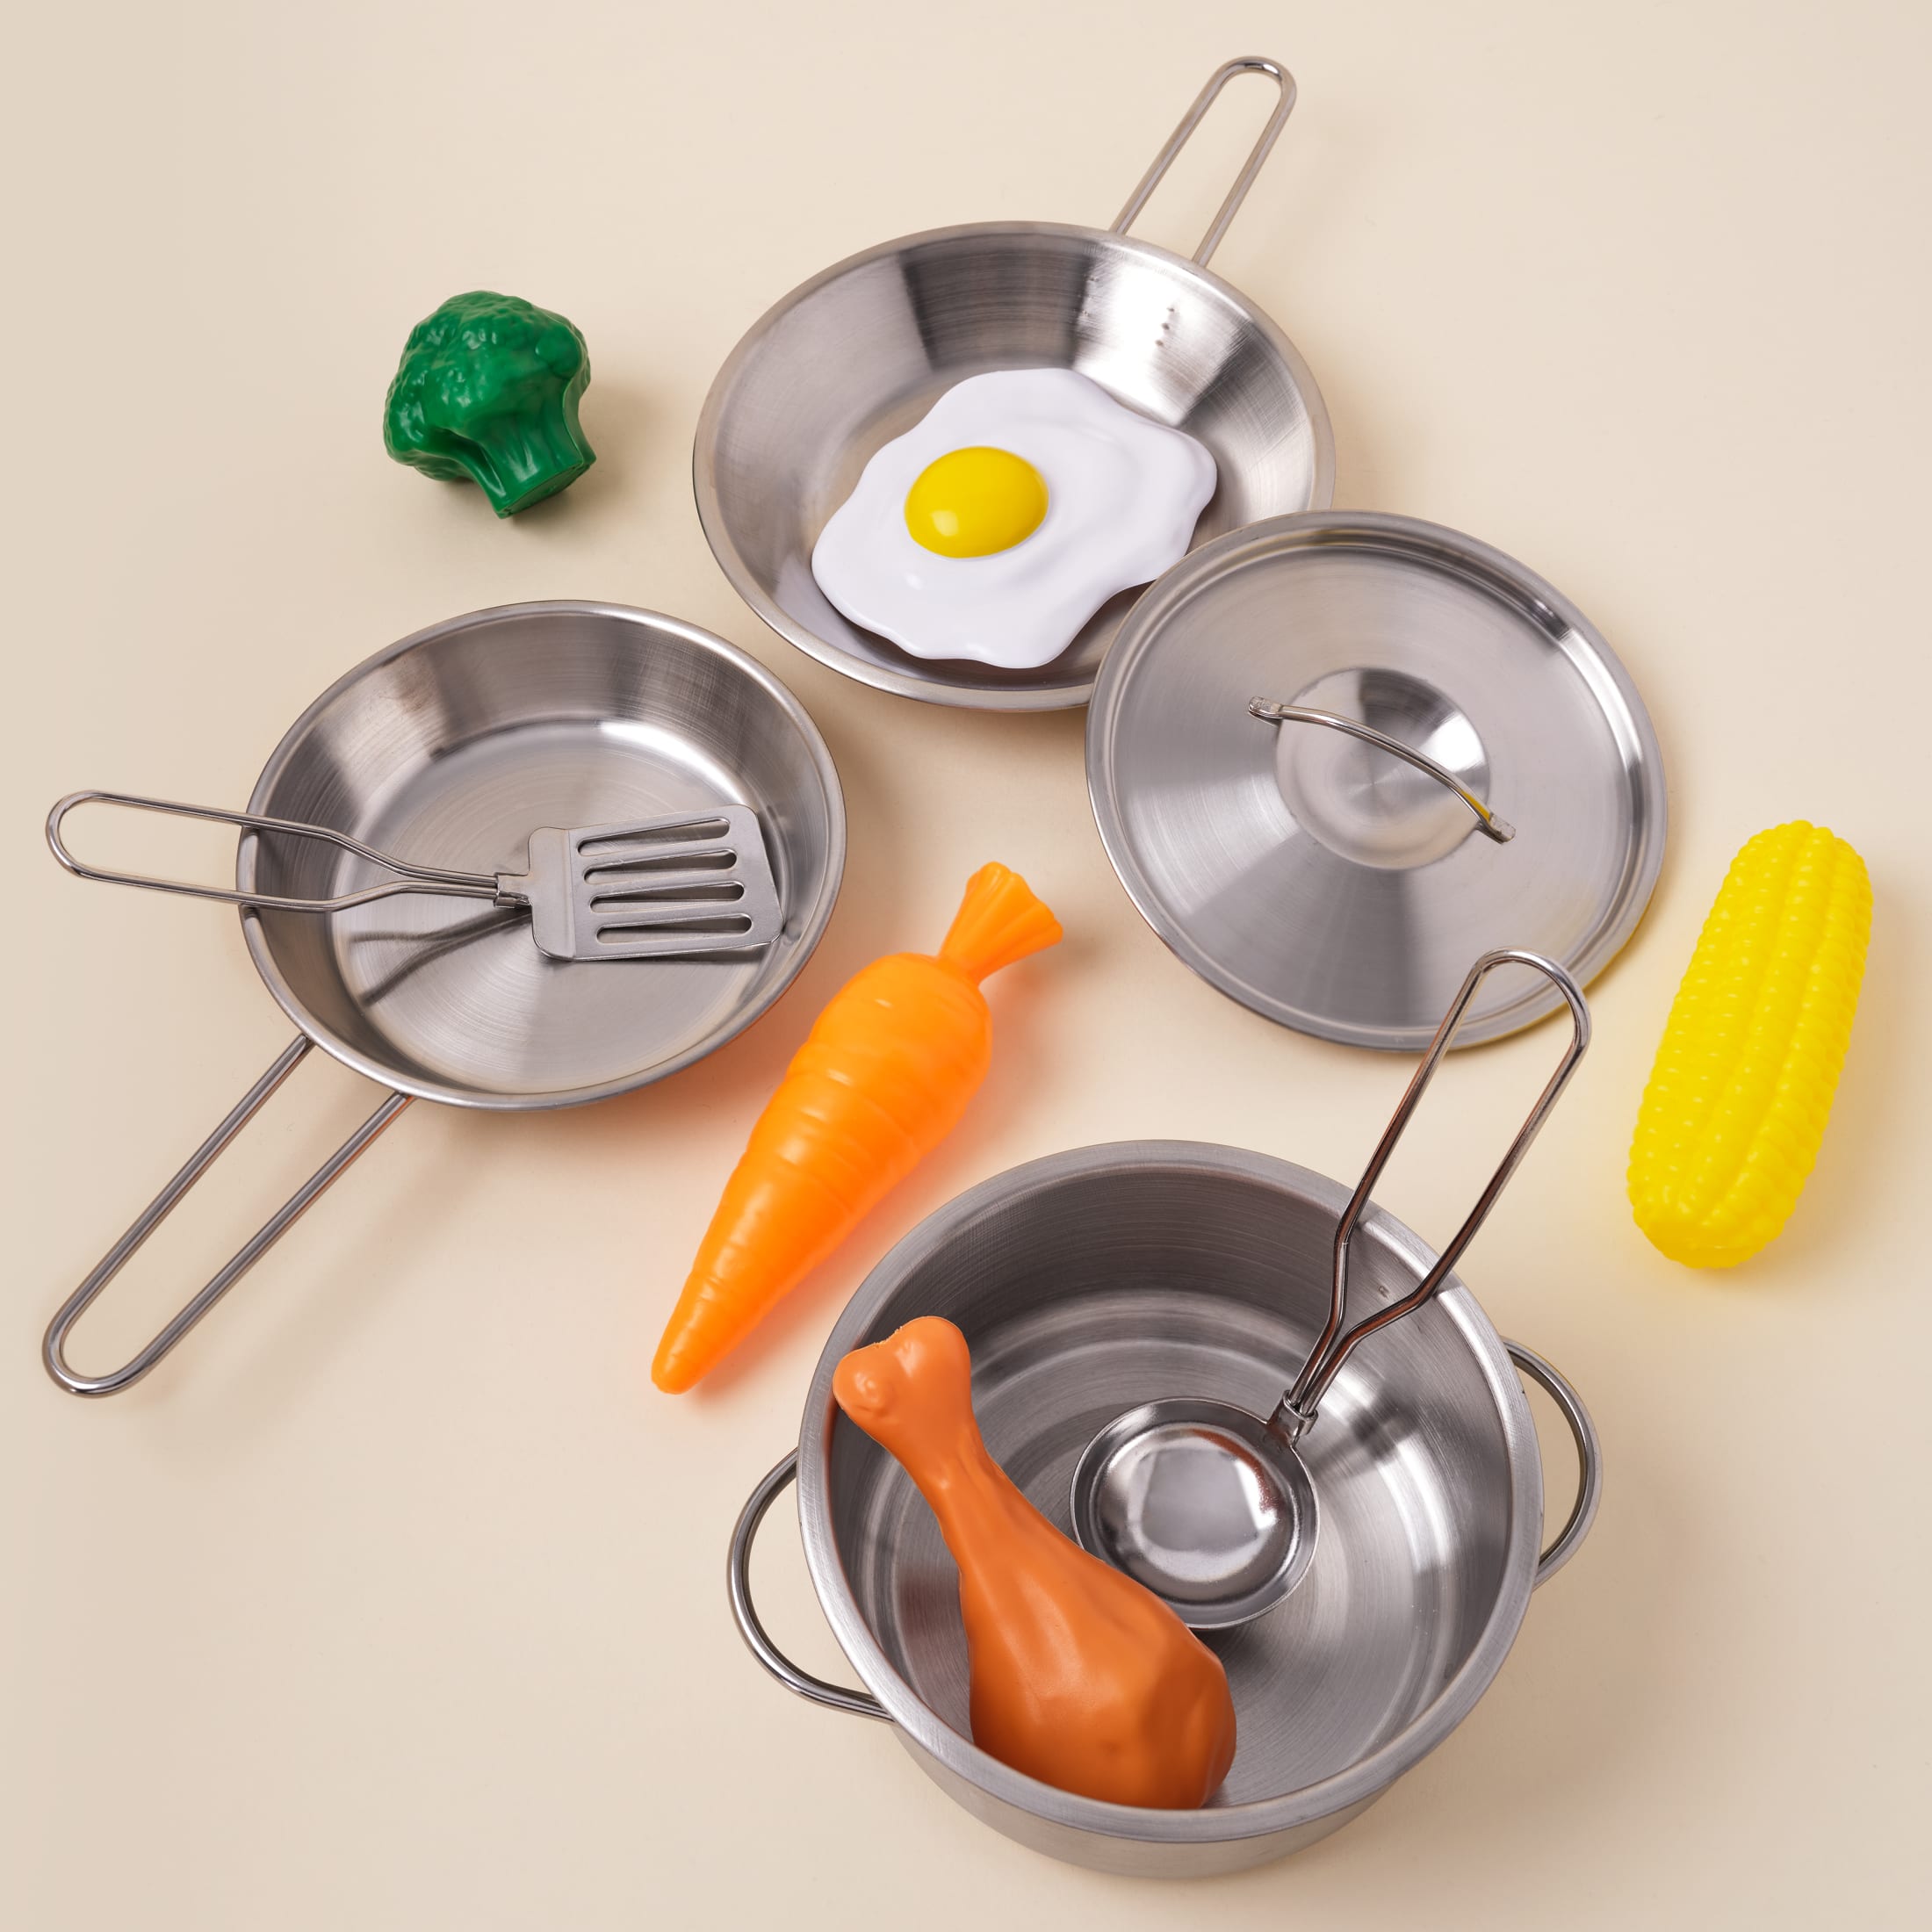 KidKraft Deluxe Cookware Metal Play Set with 11 Pieces of Play Food - image 2 of 5